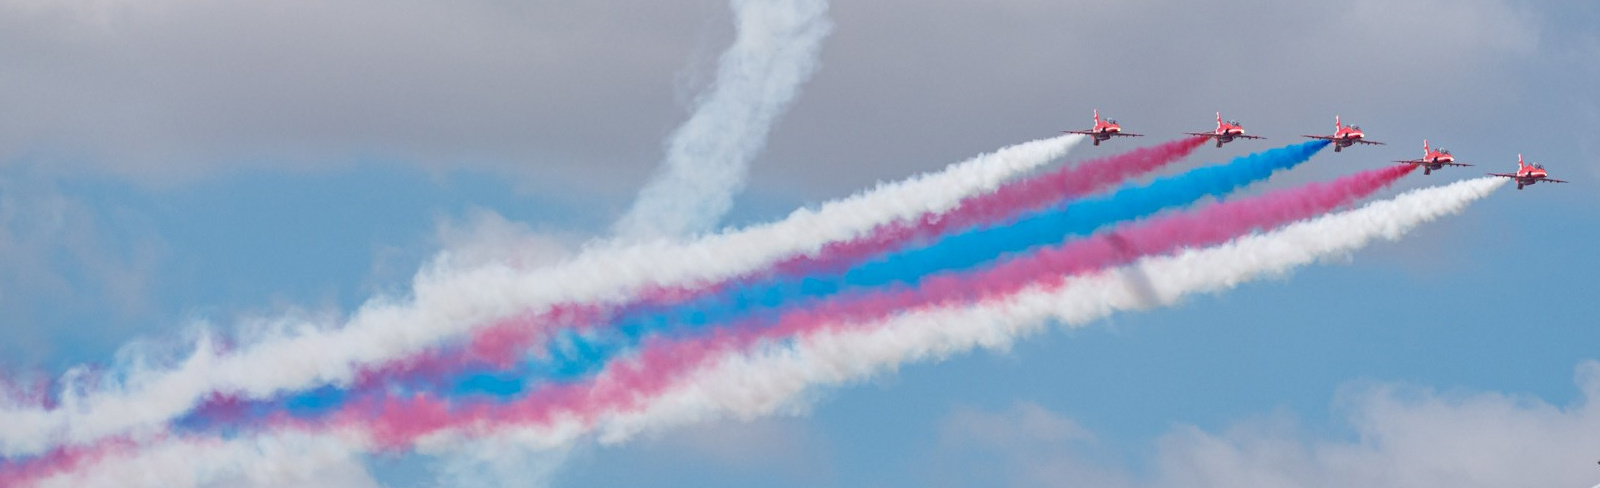 The Red Arrows Hawks flying in formation at the Royal International Air Tattoo in 2022